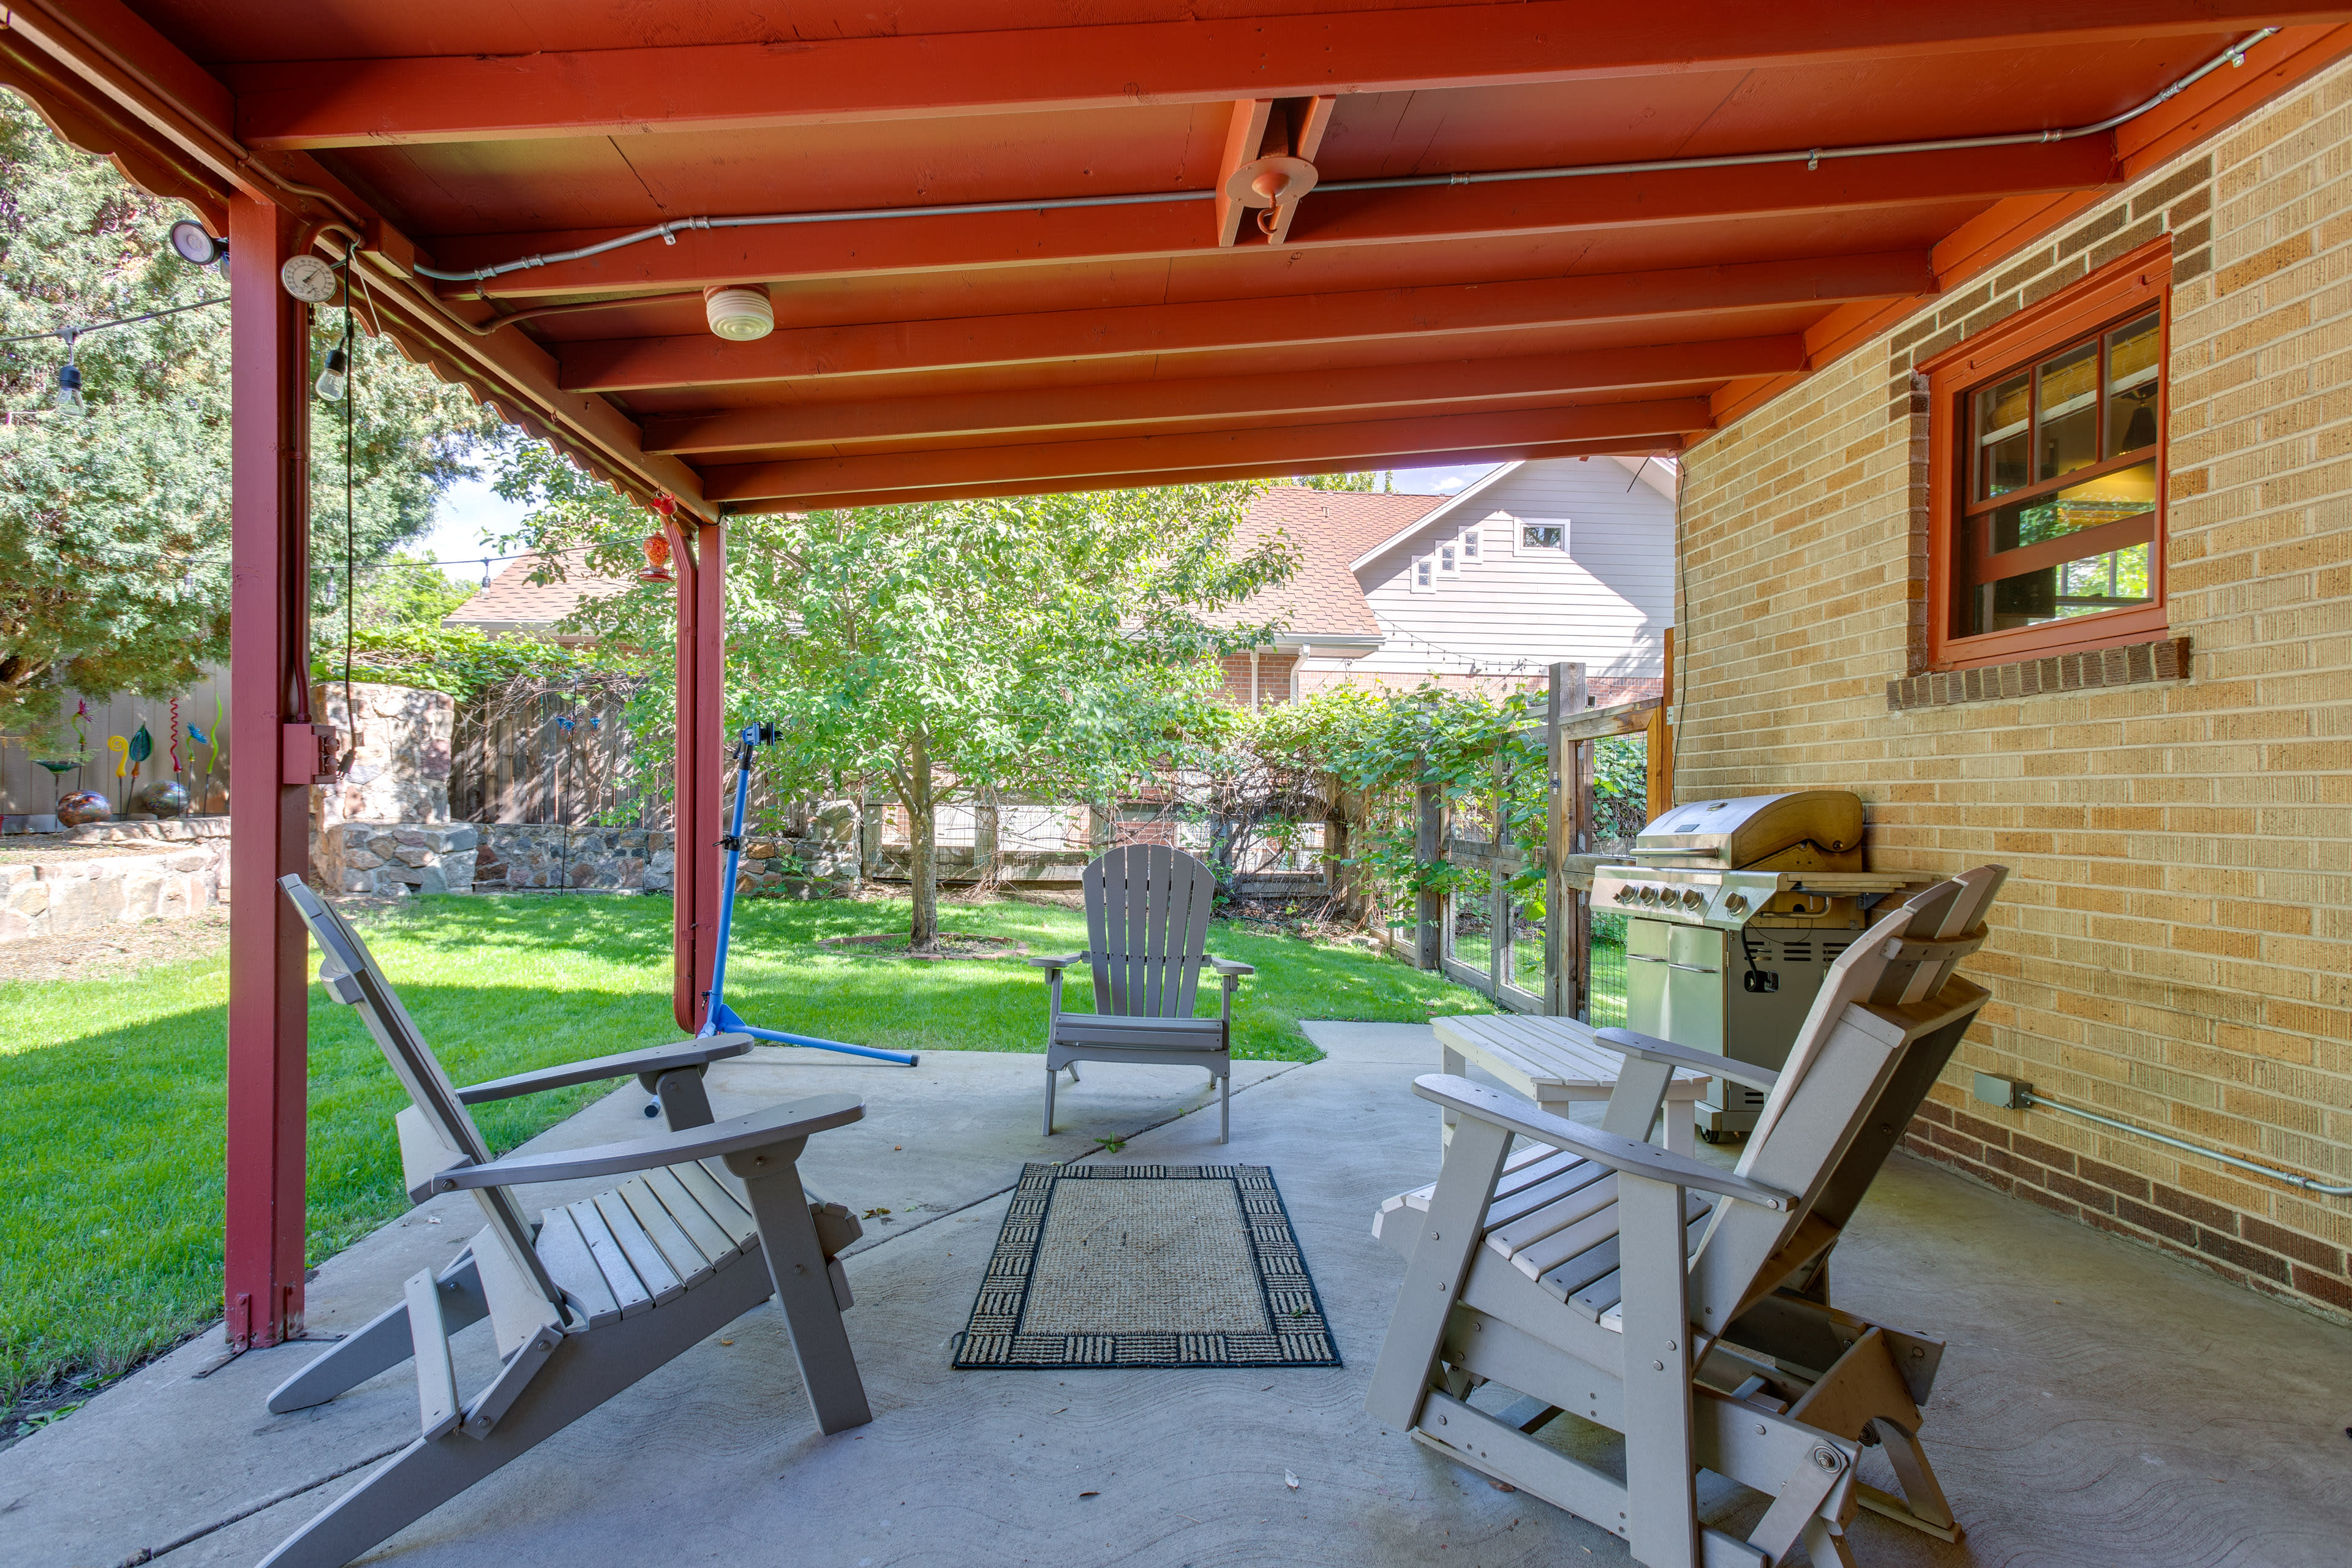 Covered Patio | Gas Grill | Backyard